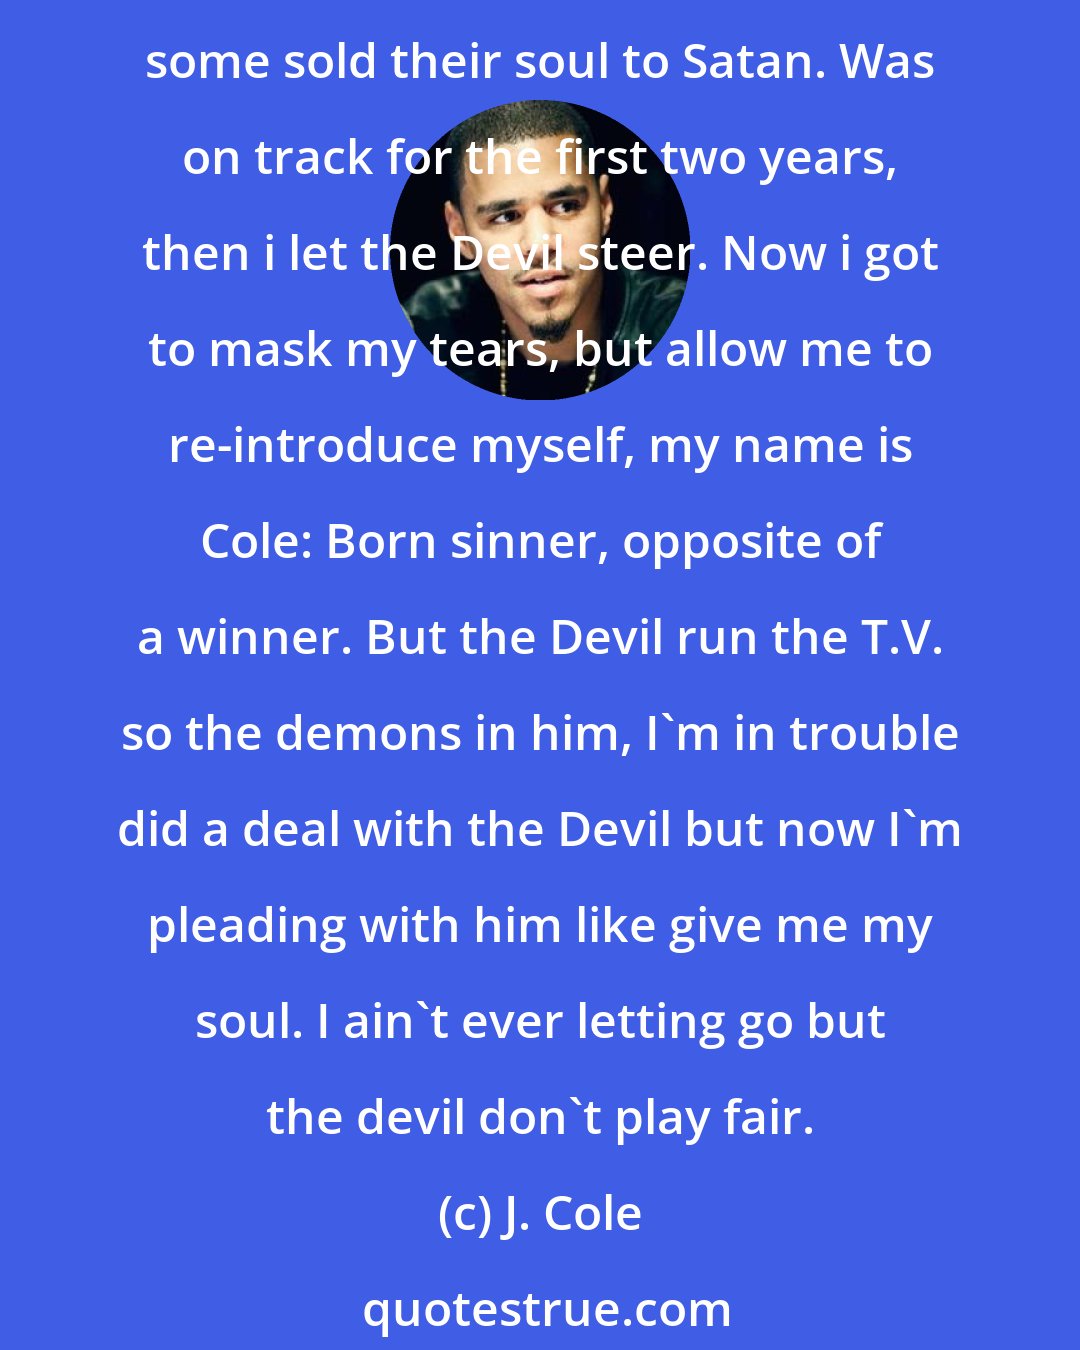 J. Cole: Sold my soul to Satan. I've been dancing with the devil. So when you get to hell you can say you know me. I'm easily attracted by the dark side. Devil keep following. For that fortune, some sold their soul to Satan. Was on track for the first two years, then i let the Devil steer. Now i got to mask my tears, but allow me to re-introduce myself, my name is Cole: Born sinner, opposite of a winner. But the Devil run the T.V. so the demons in him, I'm in trouble did a deal with the Devil but now I'm pleading with him like give me my soul. I ain't ever letting go but the devil don't play fair.